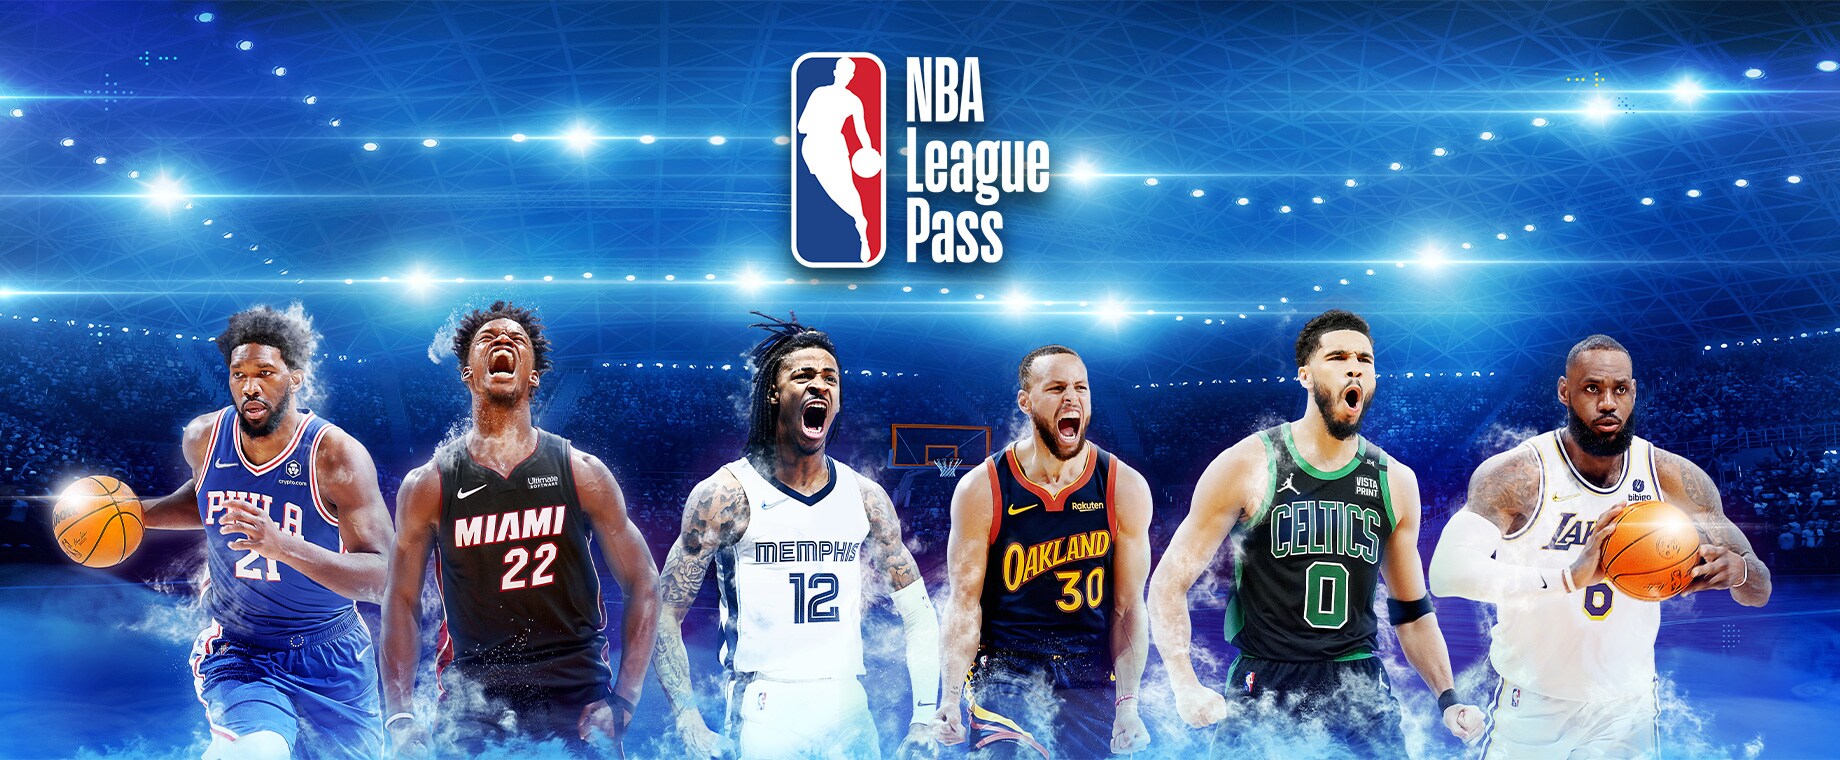 NBA League Pass ad with professional basketball players.